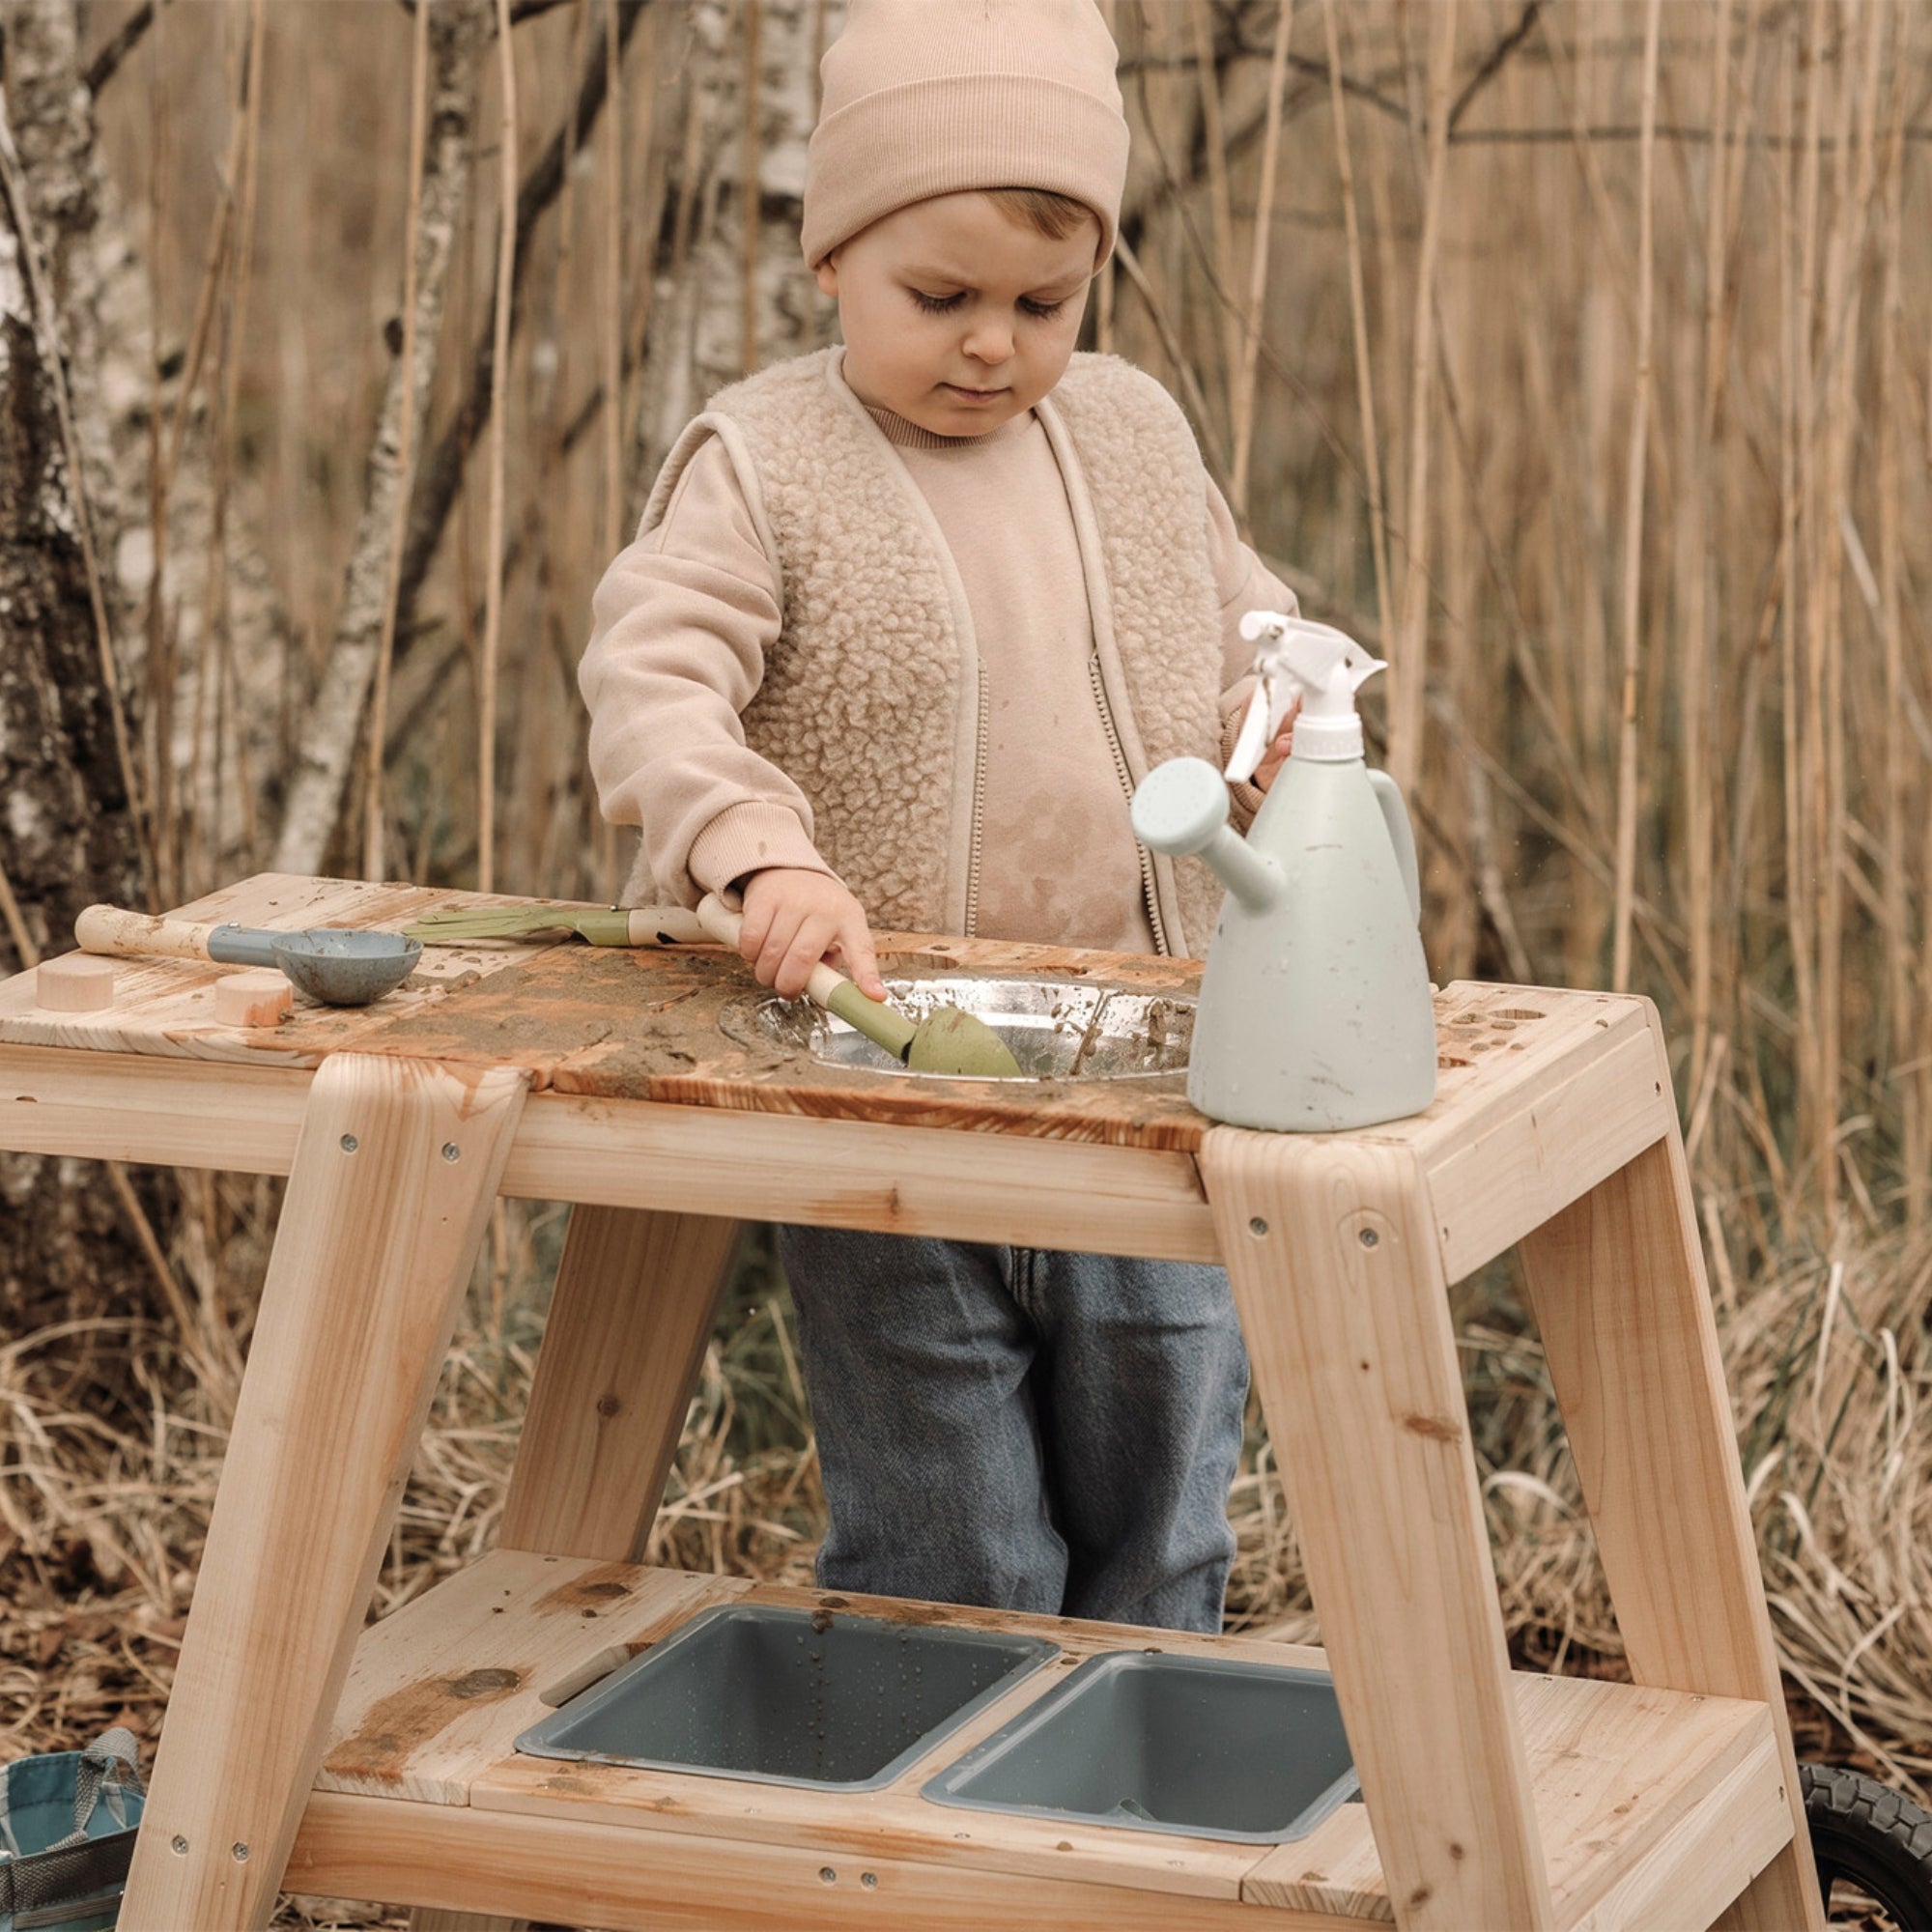 Compact Mud Kitchen,Introducing the Compact Mud Kitchen: Where endless outdoor adventures await! Perfectly designed for small gardens, terraces, or balconies, this nature-inspired play kitchen brings the joy of mud and sand play right to your doorstep. Crafted from natural, untreated solid wood, this outdoor kitchen radiates rustic charm while offering robust durability. Despite its compact size, it provides ample space for imaginative play, allowing children to explore and create from all sides. Equipped w